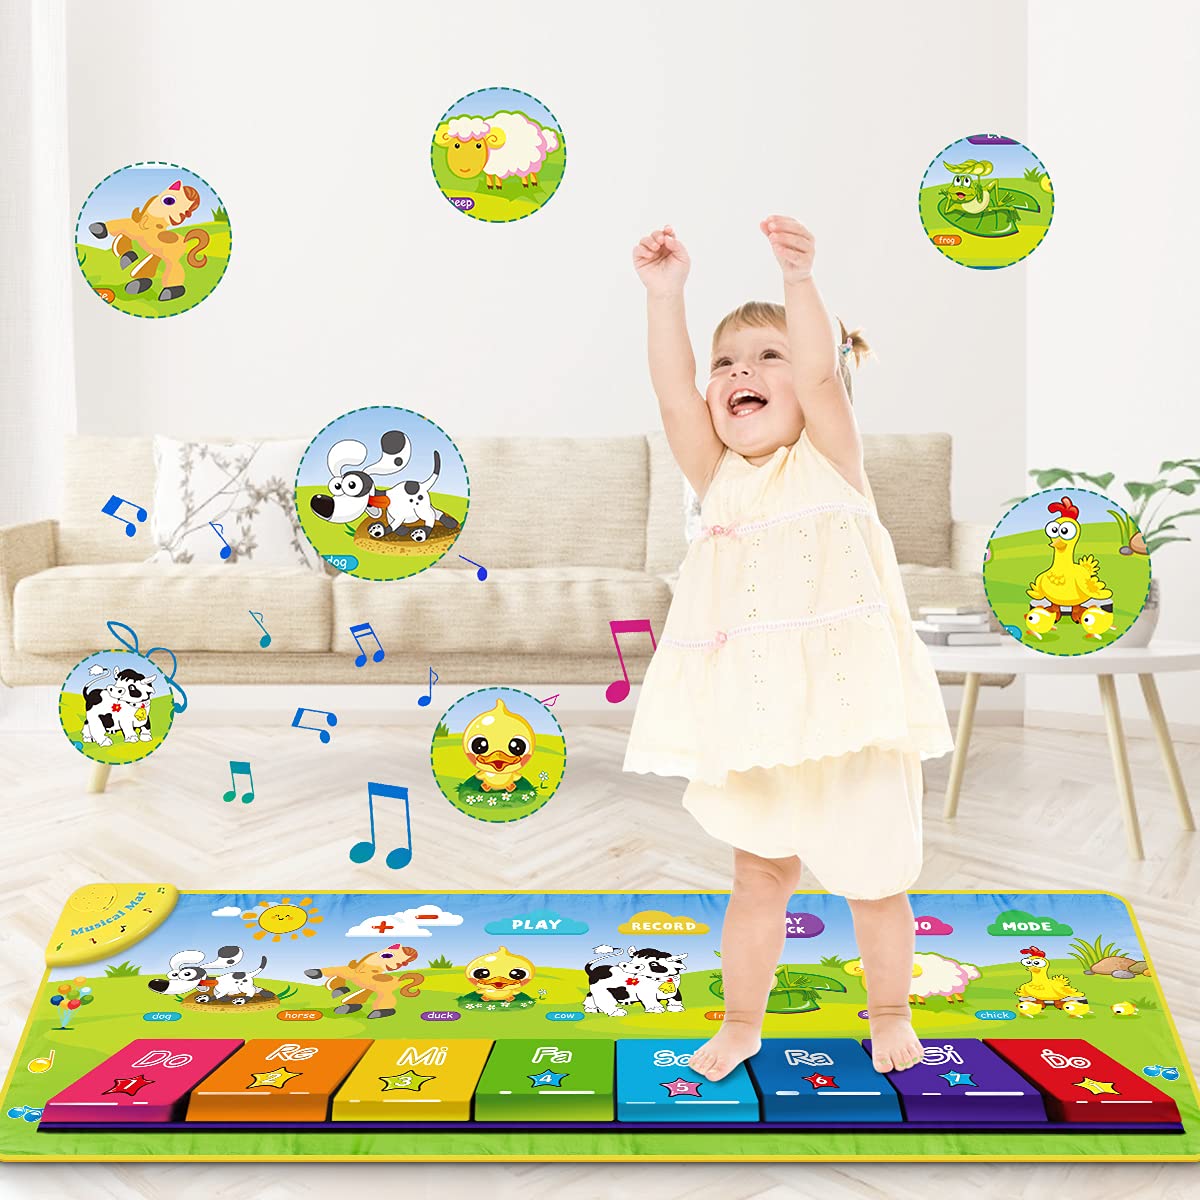 RenFox Piano Mat, ToddlerToys Musical Dance Floor Piano Keyboard Mat with 25 Music Sounds Animal Blanket Touch Playmat, Early Educational Toys Gift for 1 2 3 4 5 Years Old Baby Girls Boys